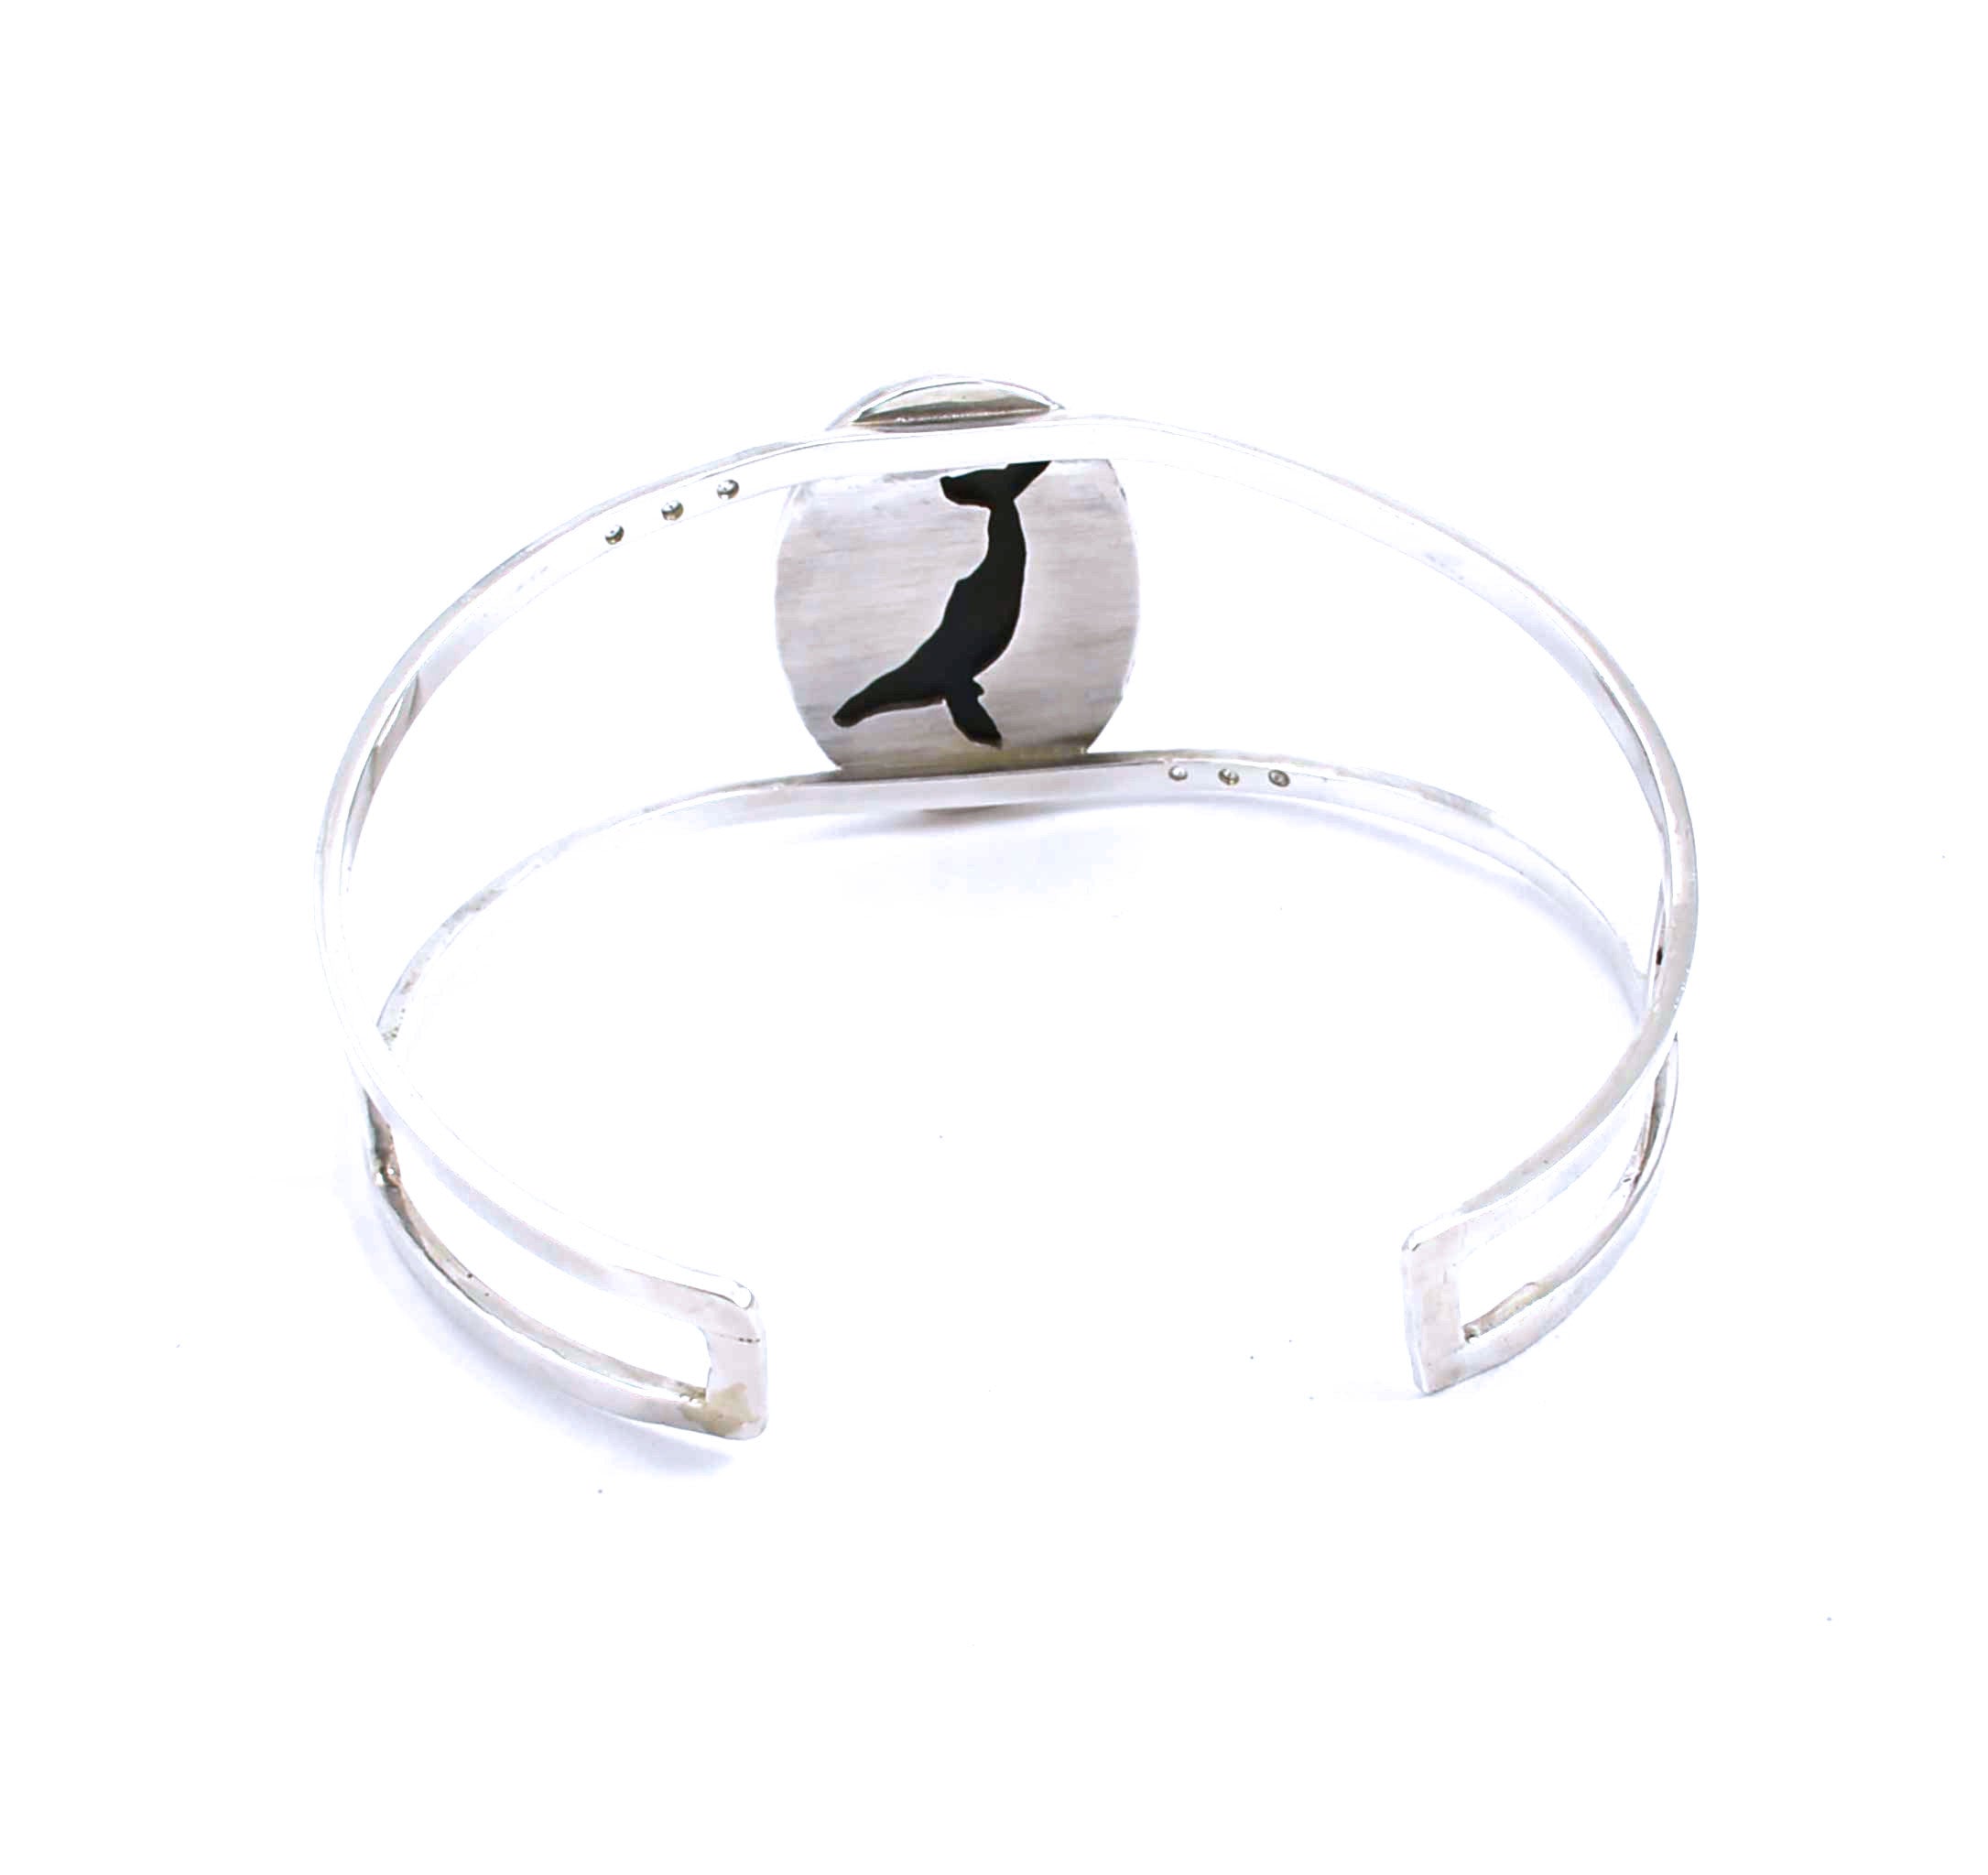 Rear view of sterling silver cuff bracelet with hawk's eye and white sapphires